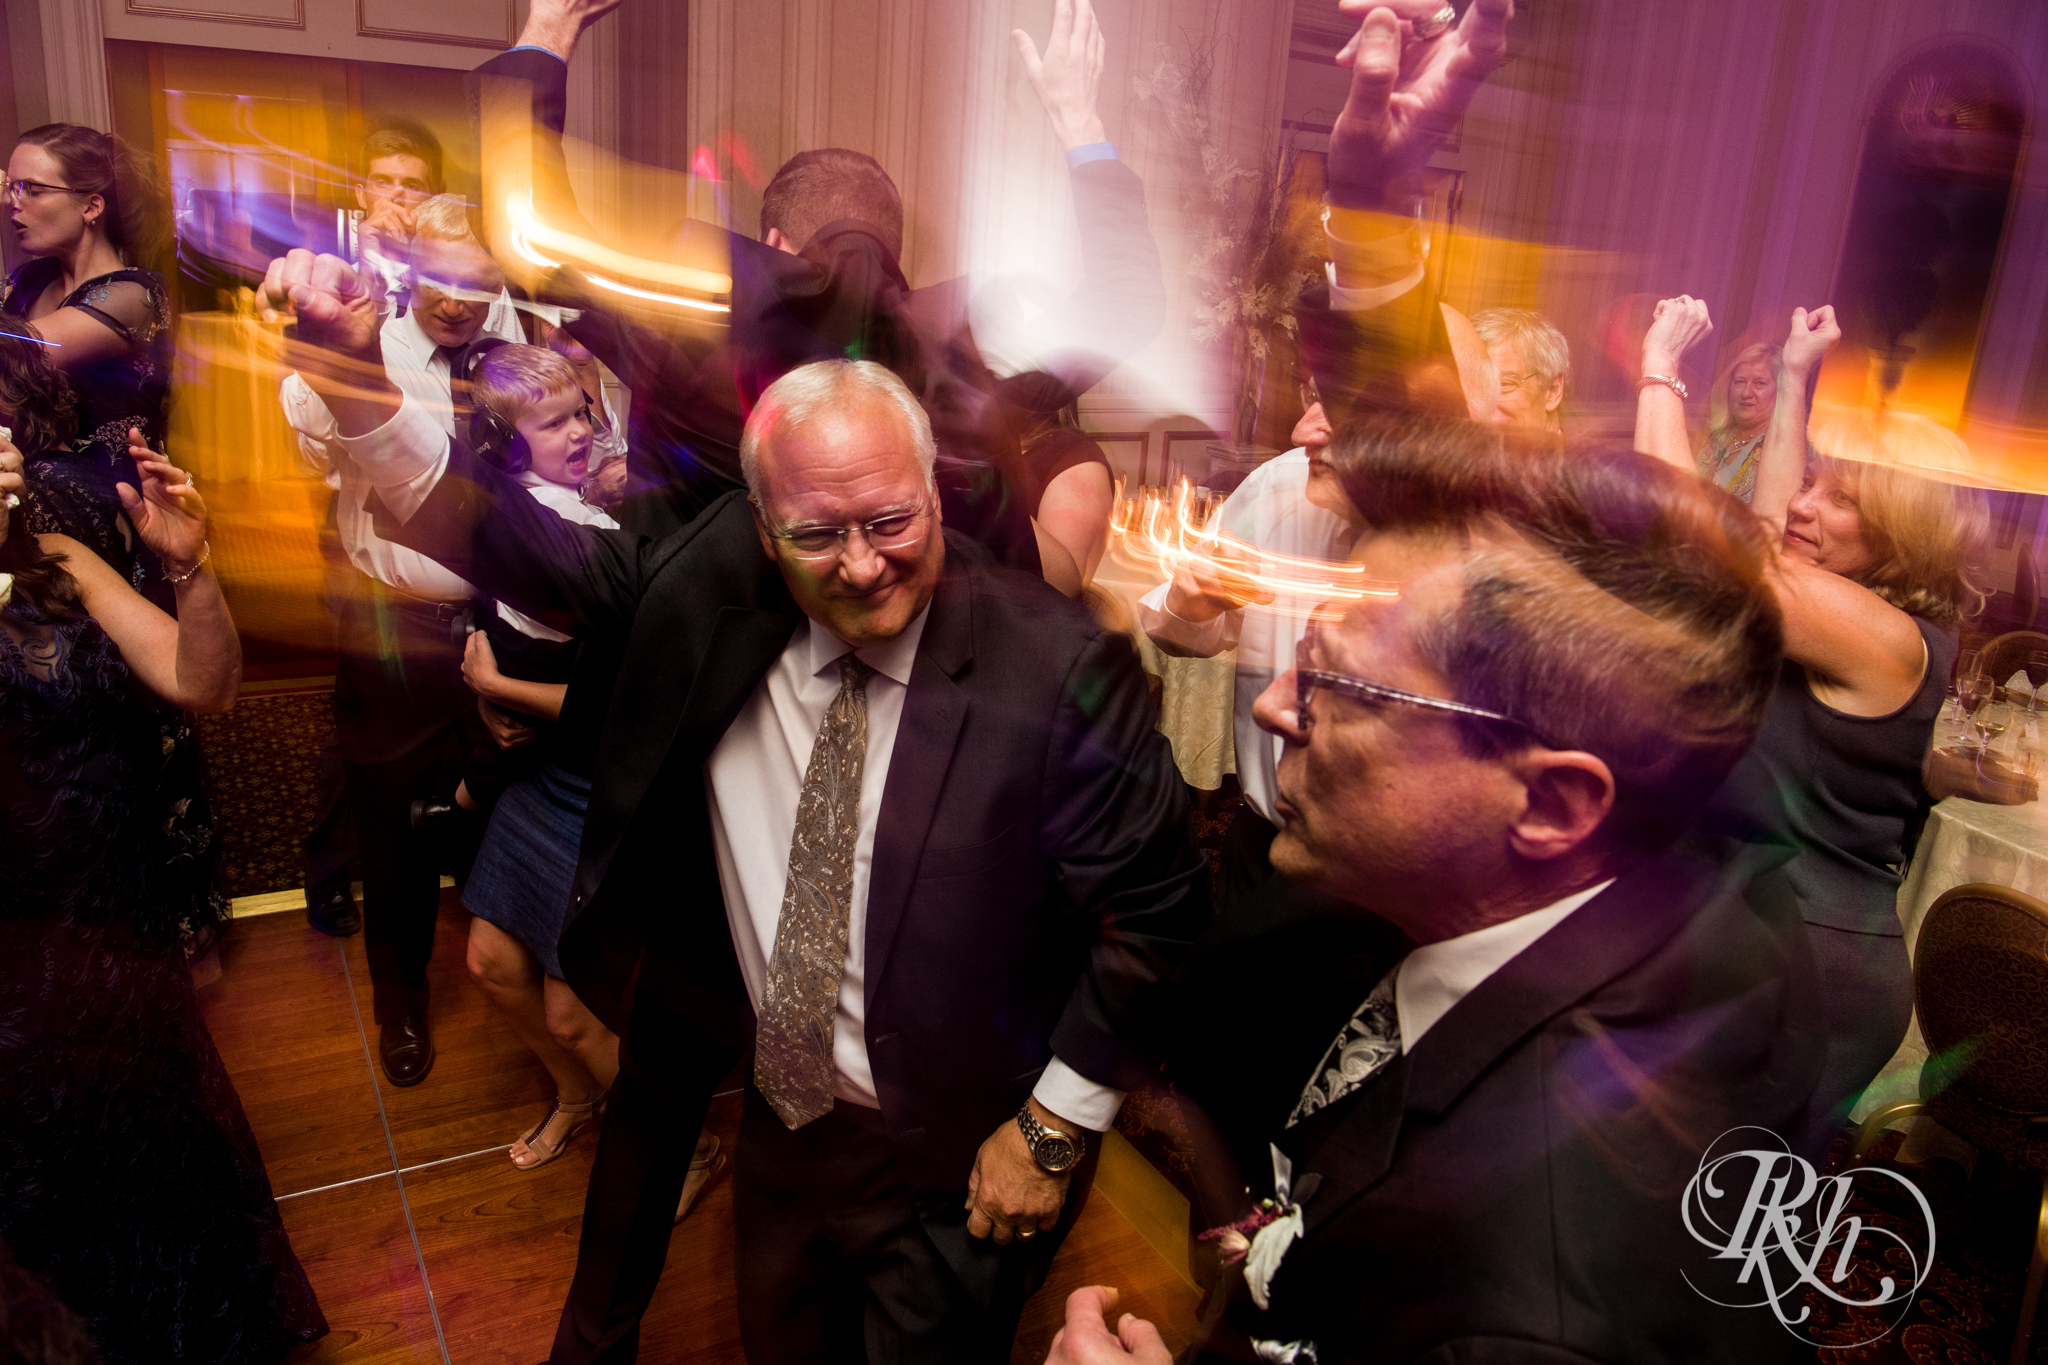 Guests dance during wedding reception at the Saint Paul Hotel in Saint Paul, Minnesota.